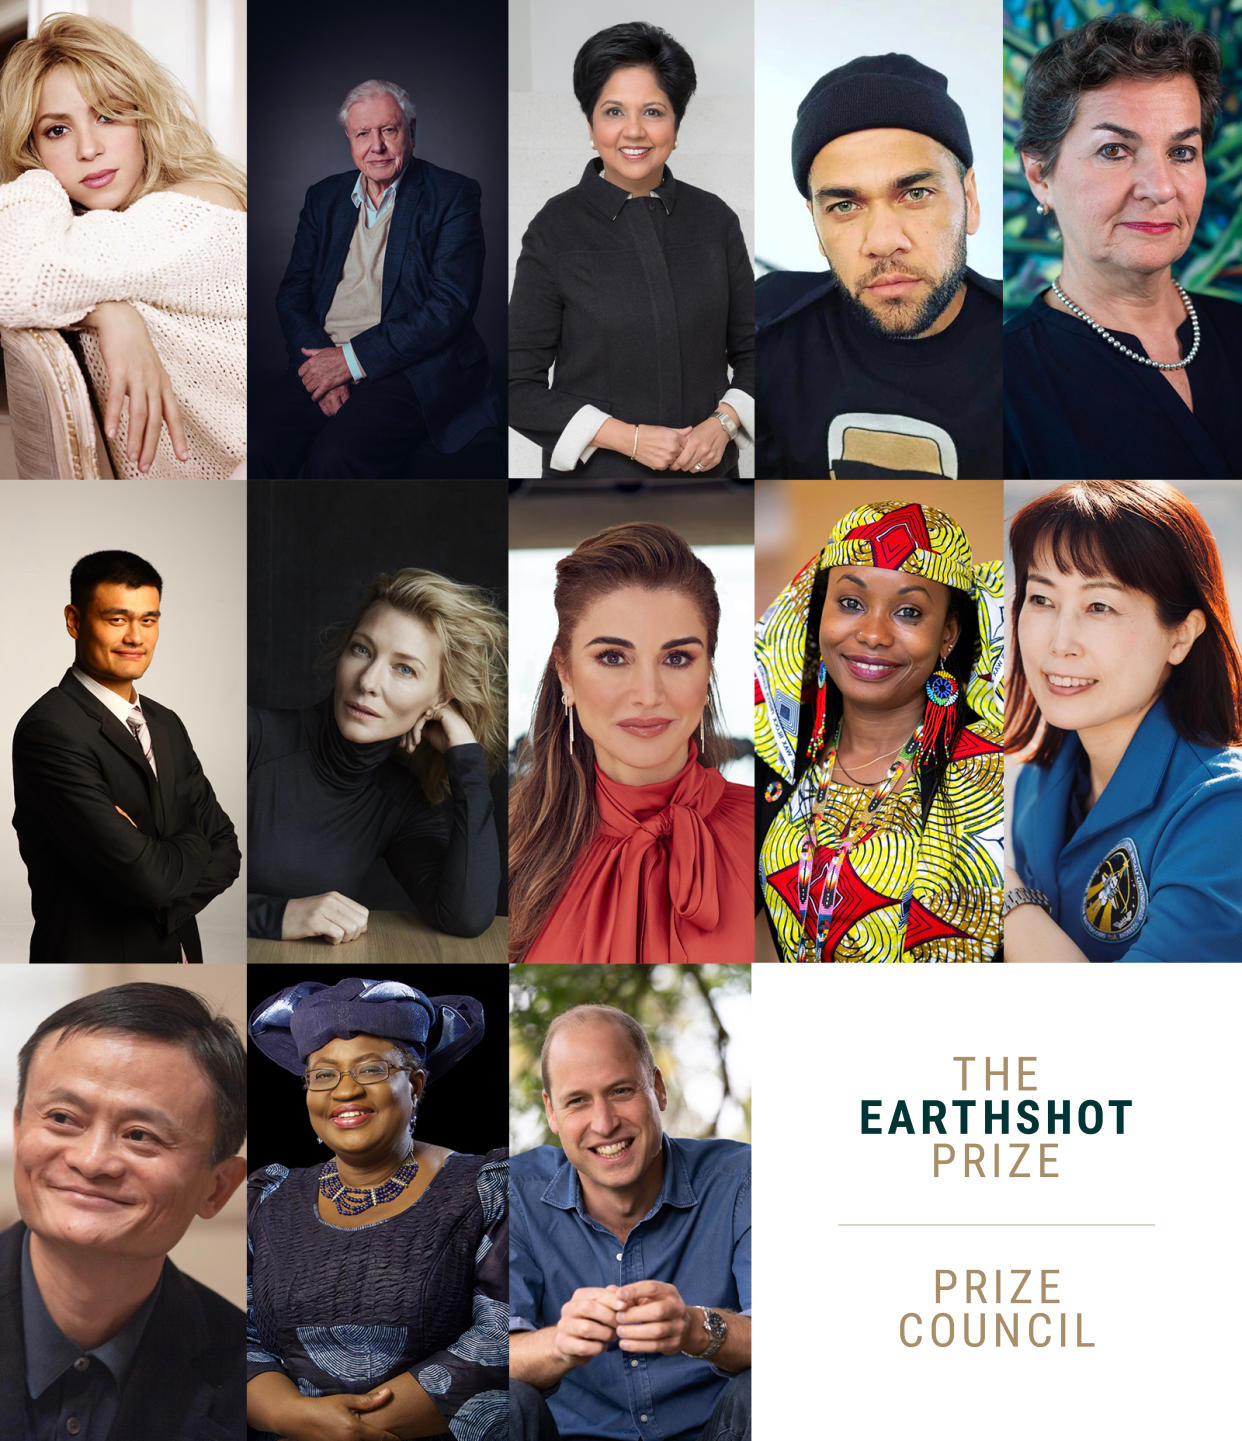 The full Earthshot Prize council has been confirmed, and includes Sir David Attenborough. (Royal Foundation)